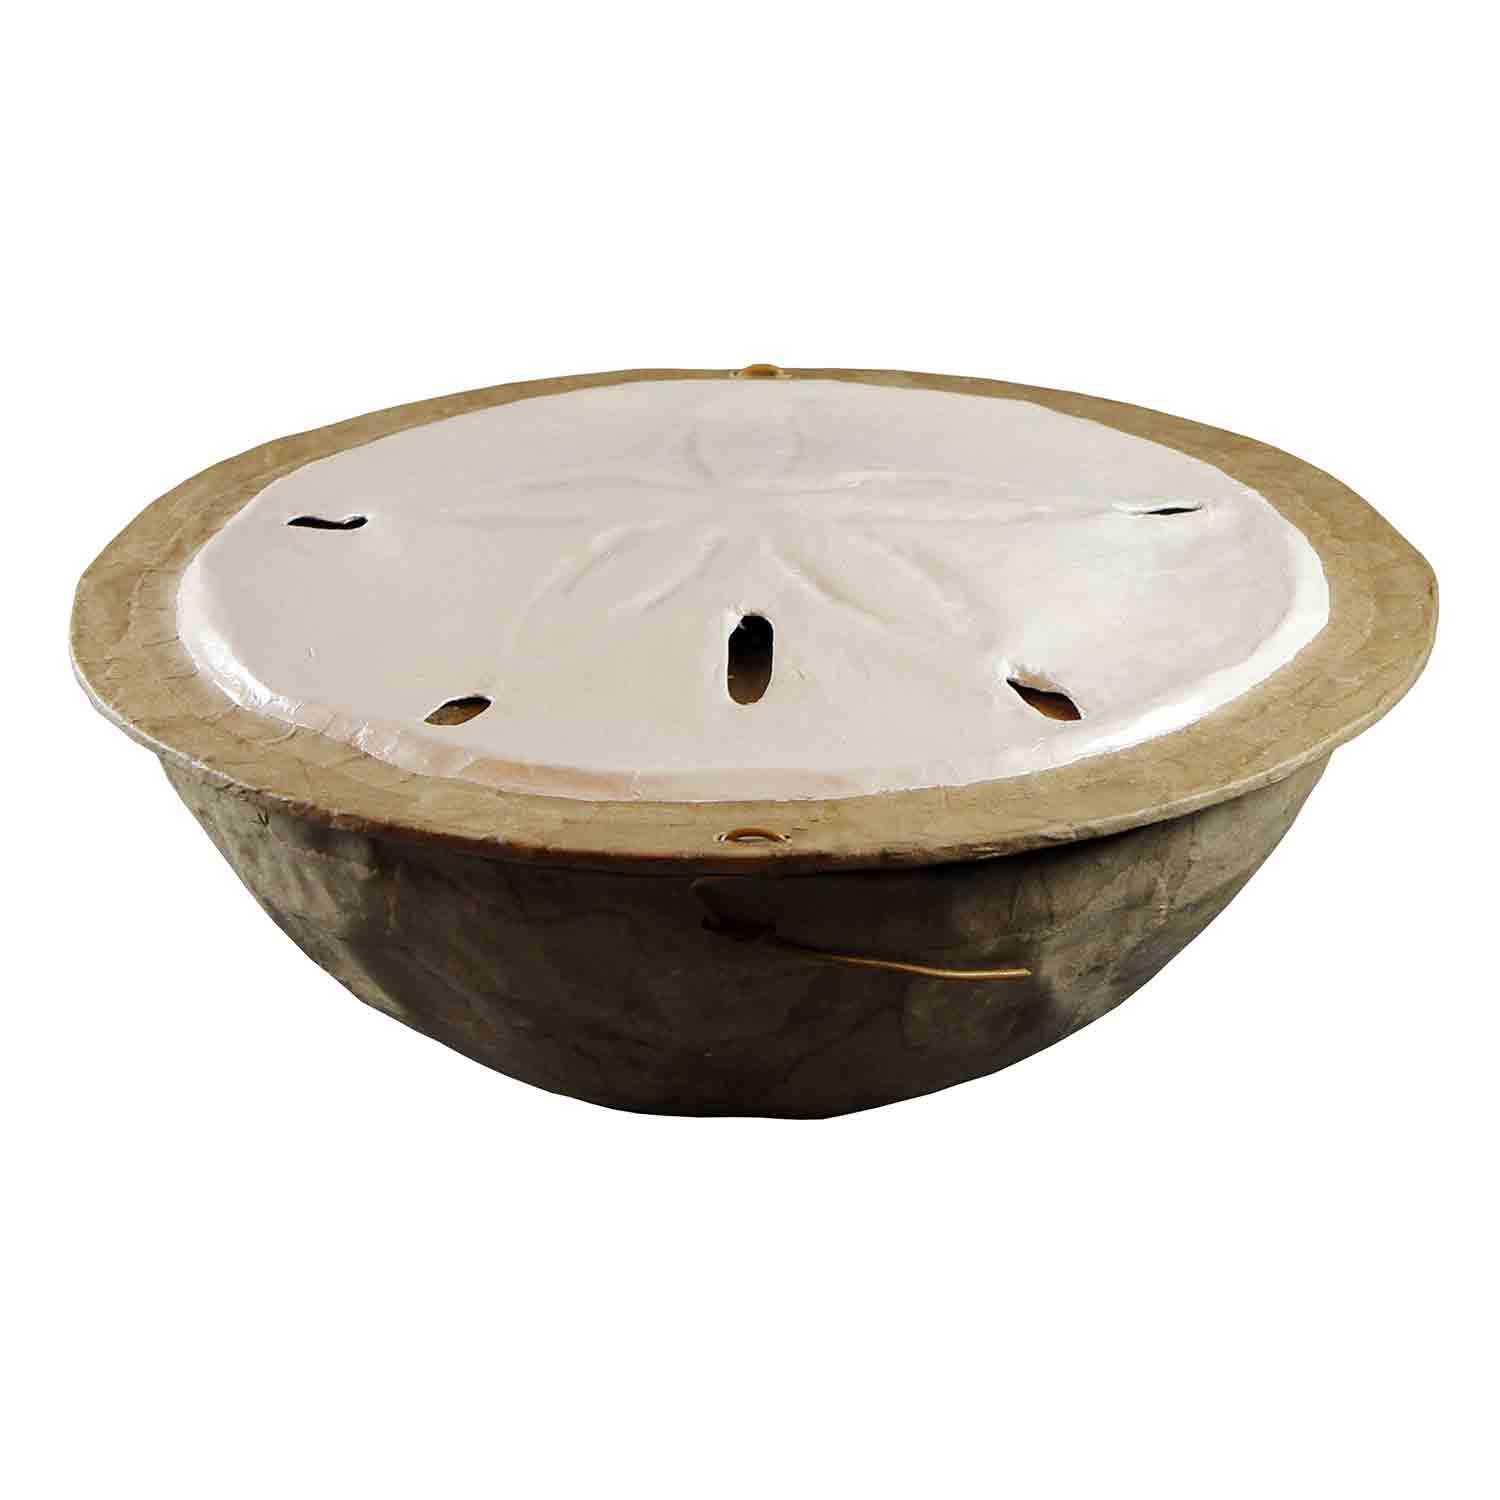 Serenity Sand Dollar Biodegradable Water Urn for Ashes